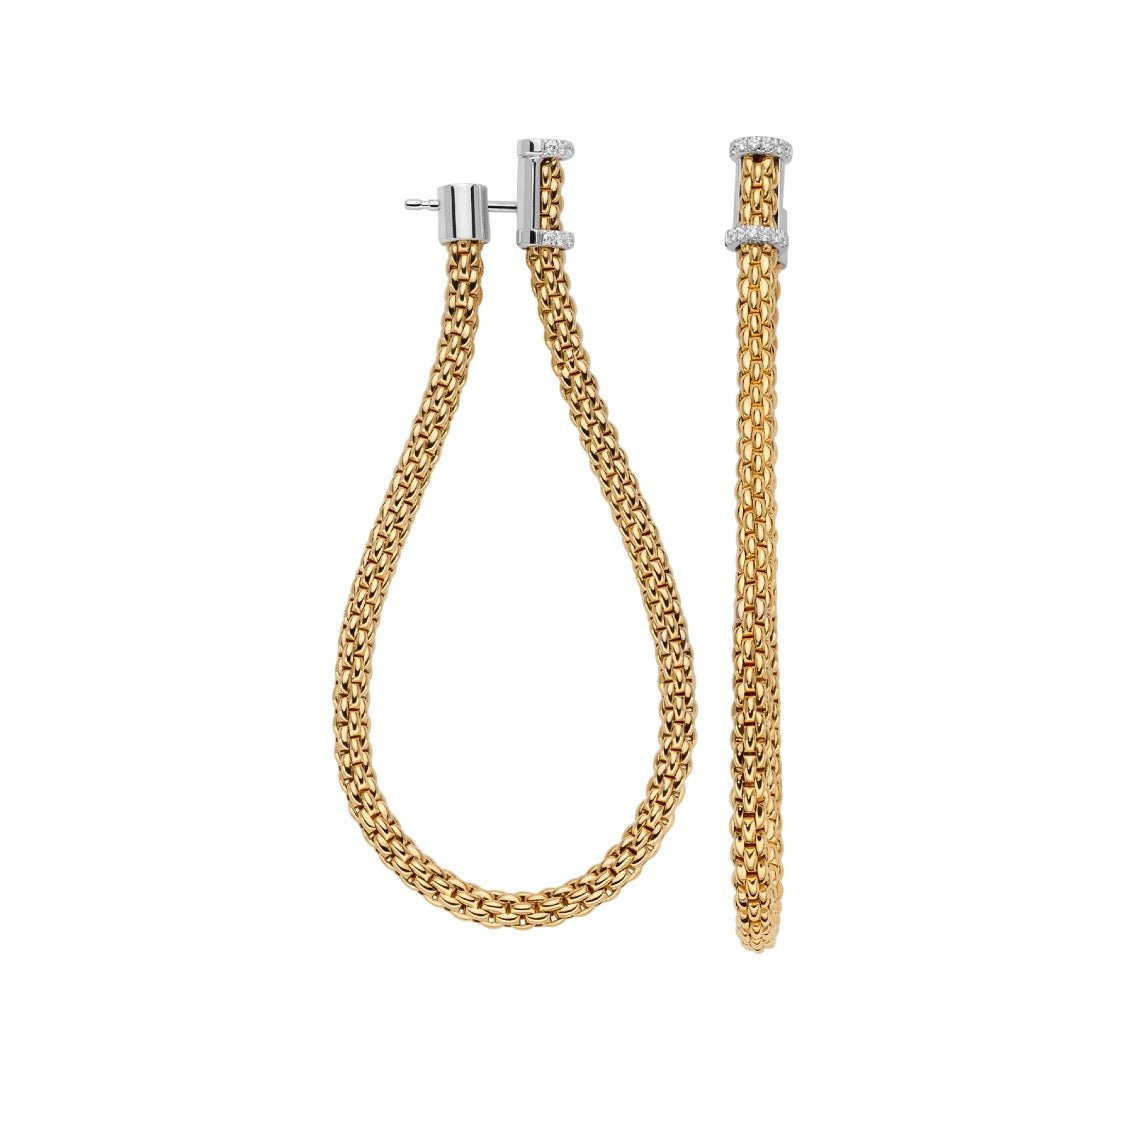 Flex’It Earrings in Gold with Pave Diamonds - Aurum Jewels